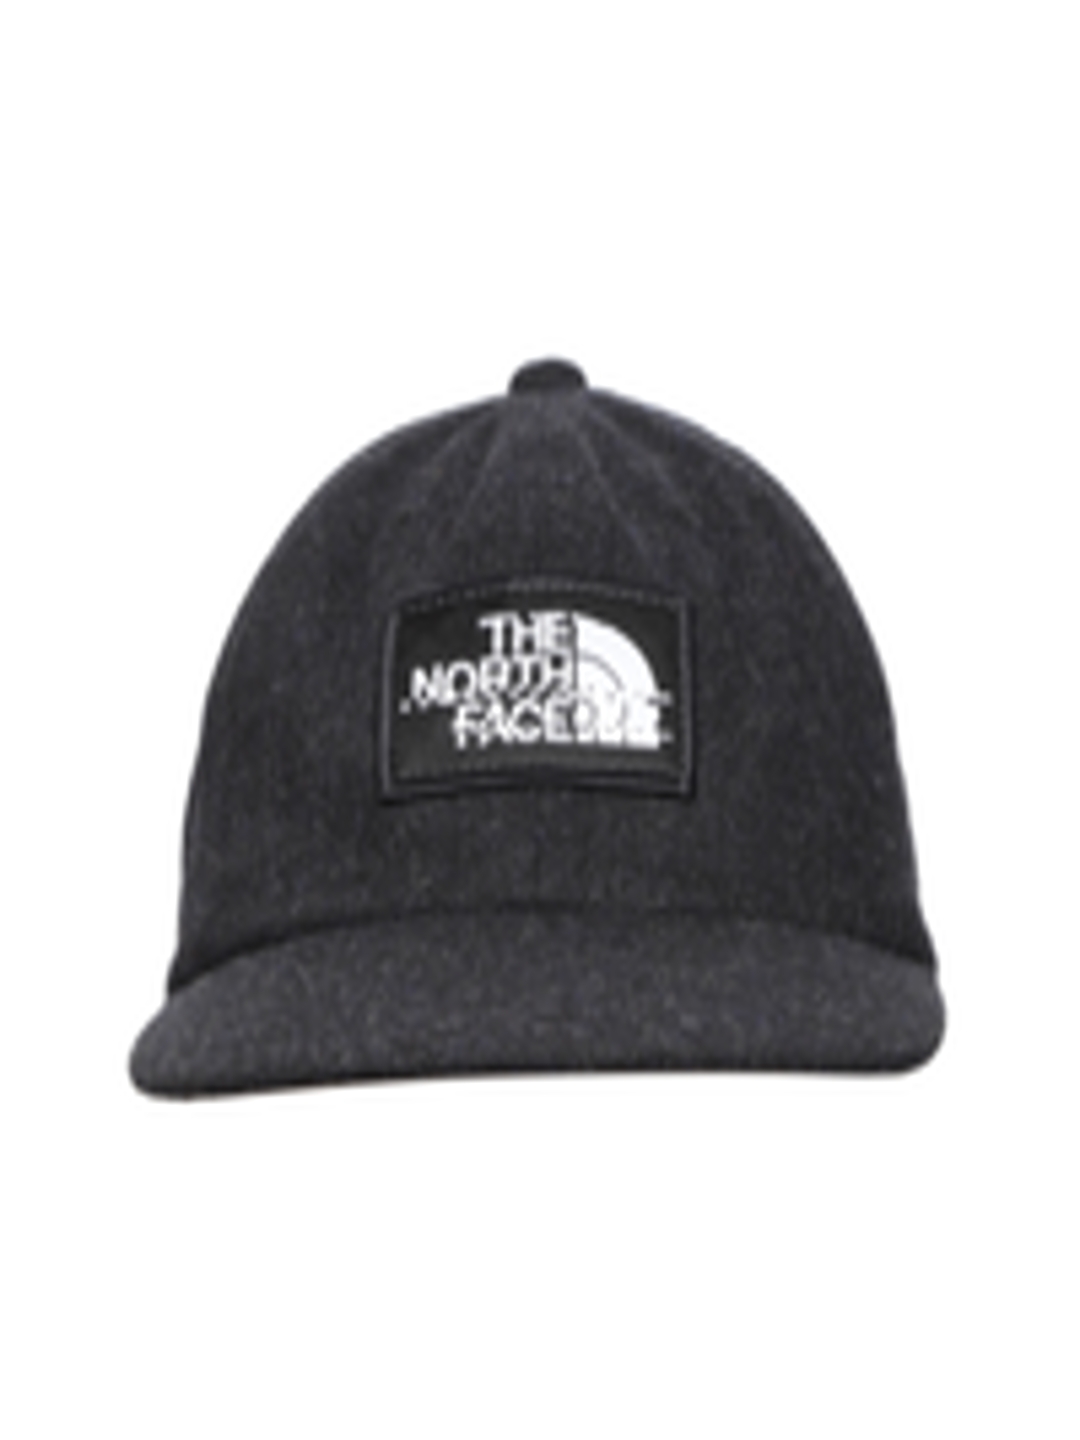 Buy The North Face Unisex Black Wool Ball Baseball Cap - Caps for